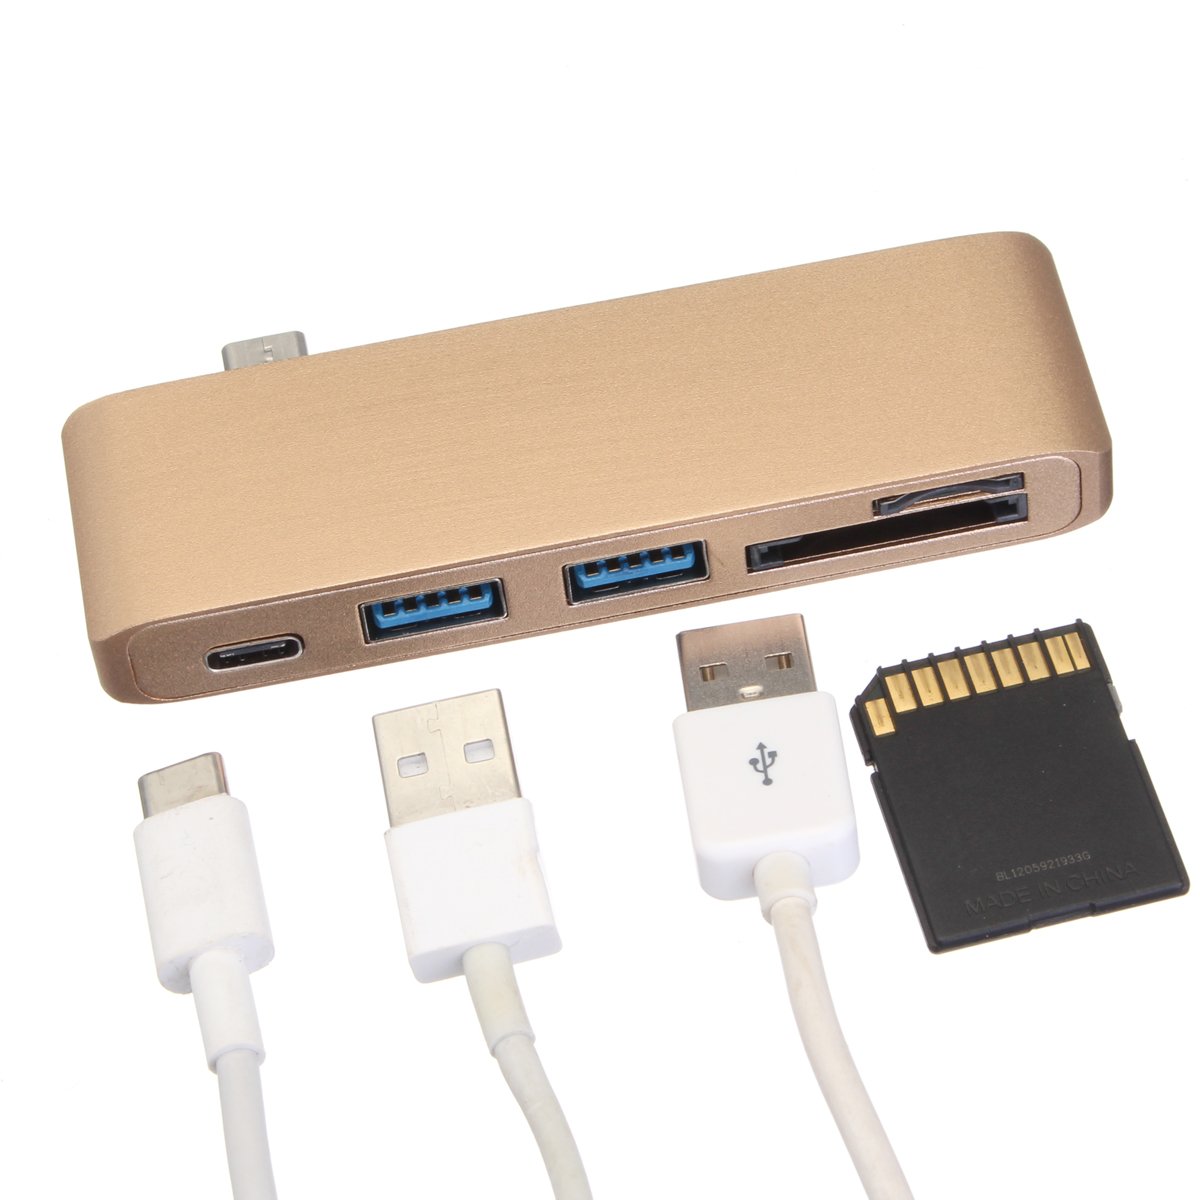 Multifunction USB Hub Type-C to Type-C USB 3.0 2Ports TF SD Card Reader for Laptop PC 1